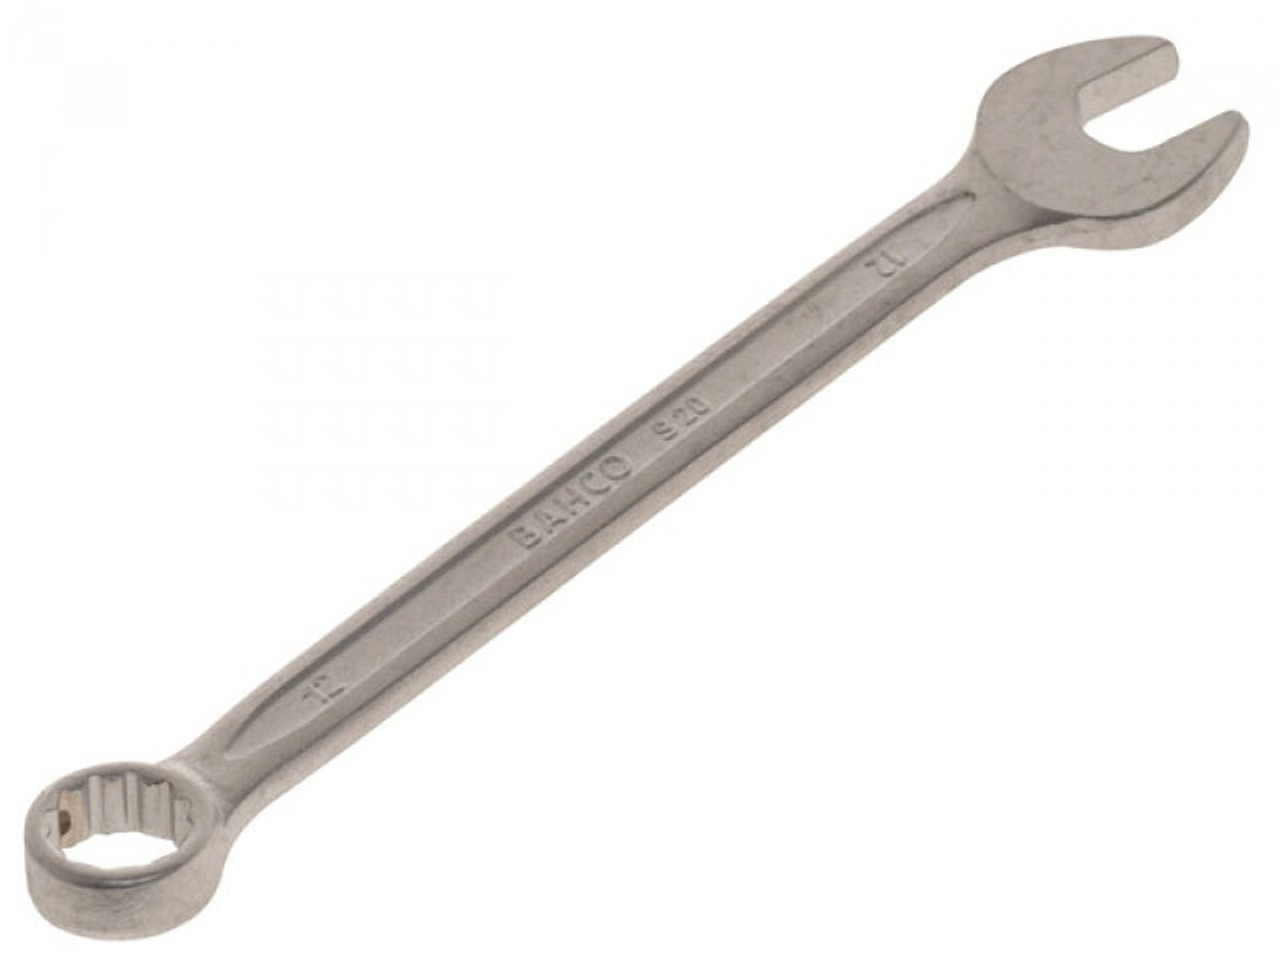 IMPA 616151 WRENCH OPEN & 12-POINT BOX METRIC 28mm  TRANSTIME